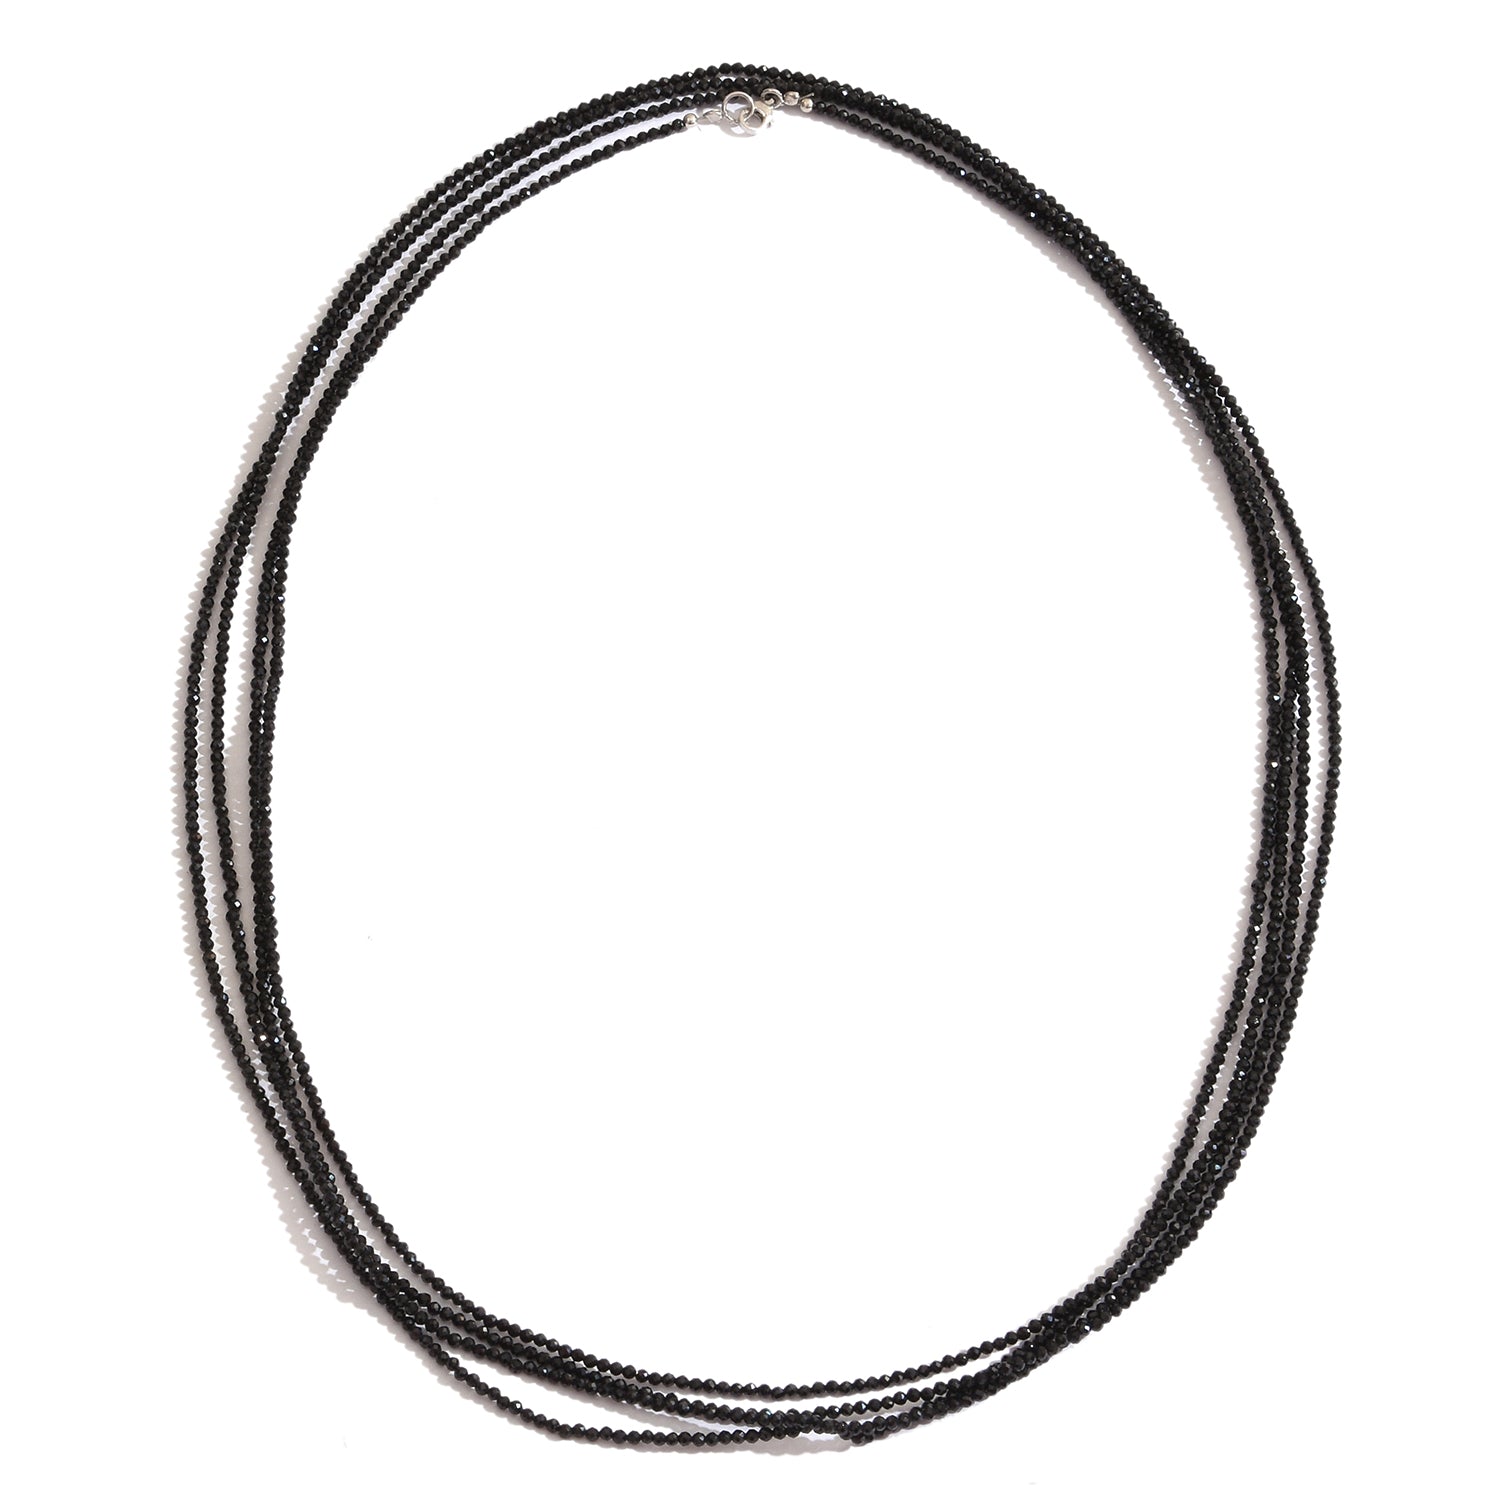 Thai Black Spinel Sterling Silver Necklace (100 in) TGW 80.00 cts. - Houzz of DVA Boutique